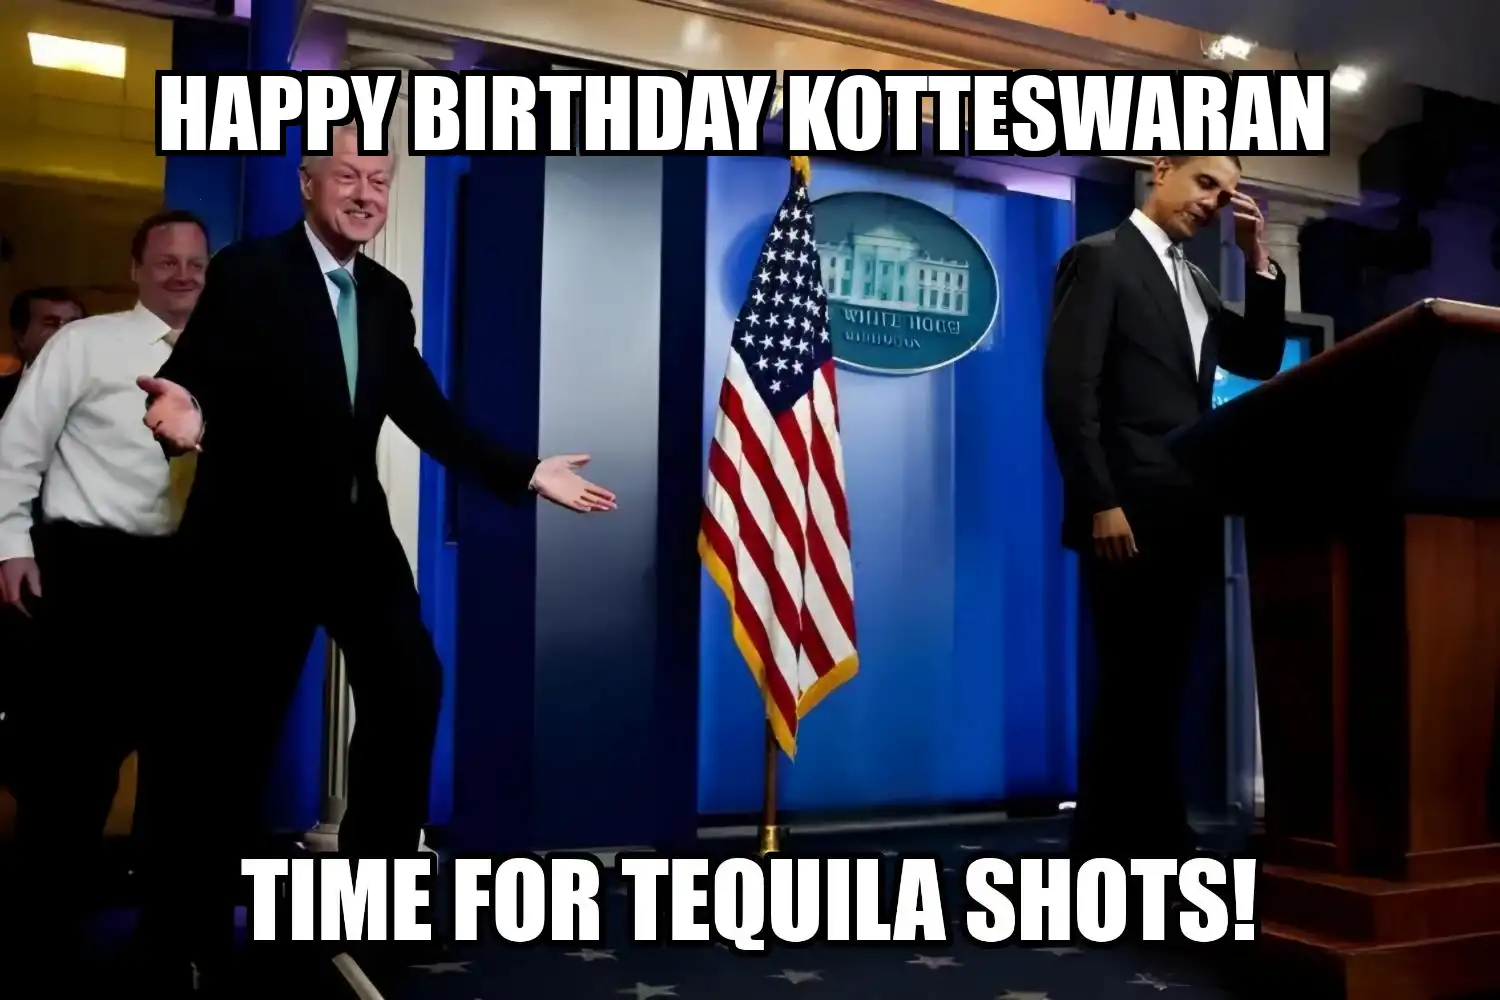 Happy Birthday Kotteswaran Time For Tequila Shots Memes